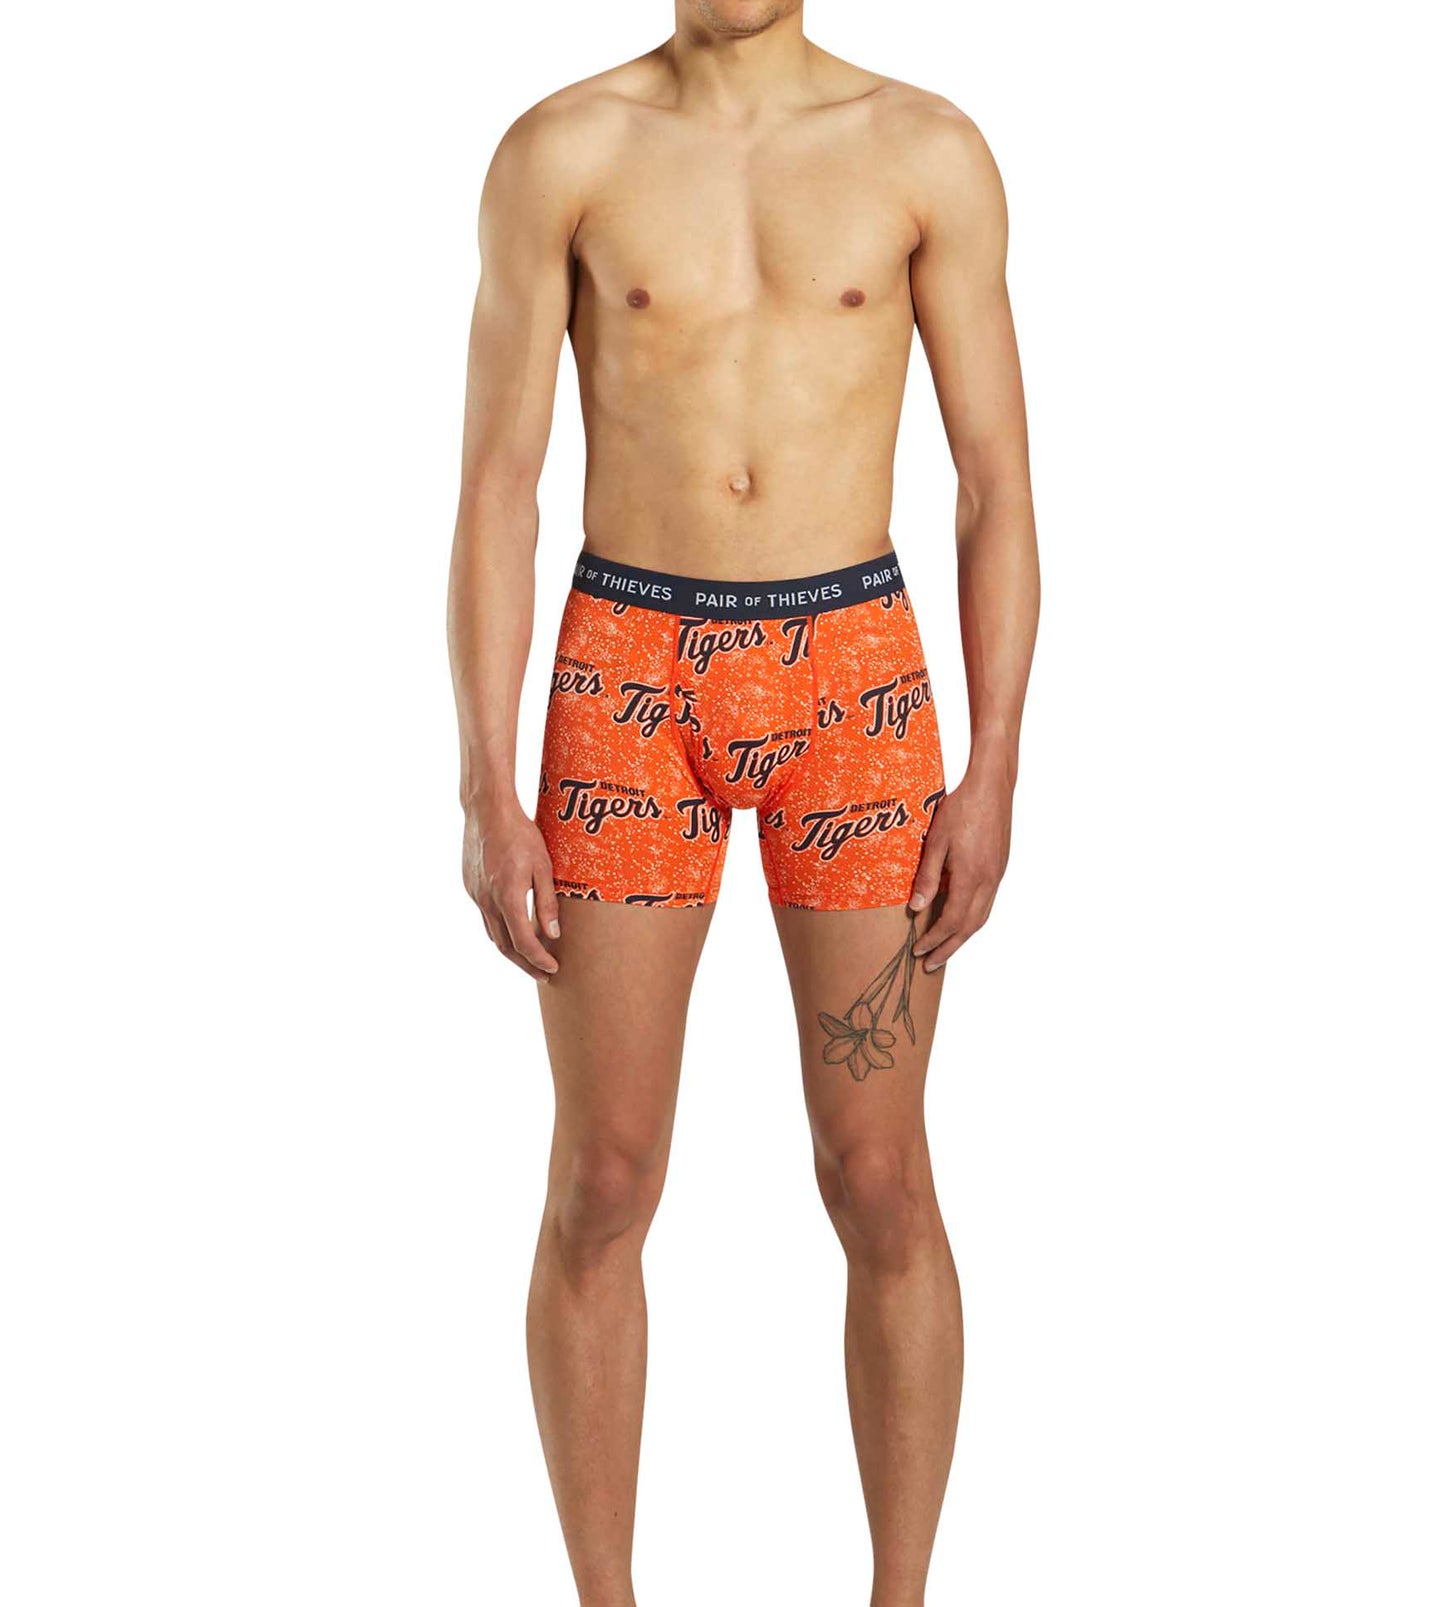 MLB Detroit Tigers SuperFit Boxer Brief 2 Pack containing the colors Rosy brown, Burly wood, Fire brick, Chocolate, Tan, Indian red, Coral, Dark slate gray, Sienna